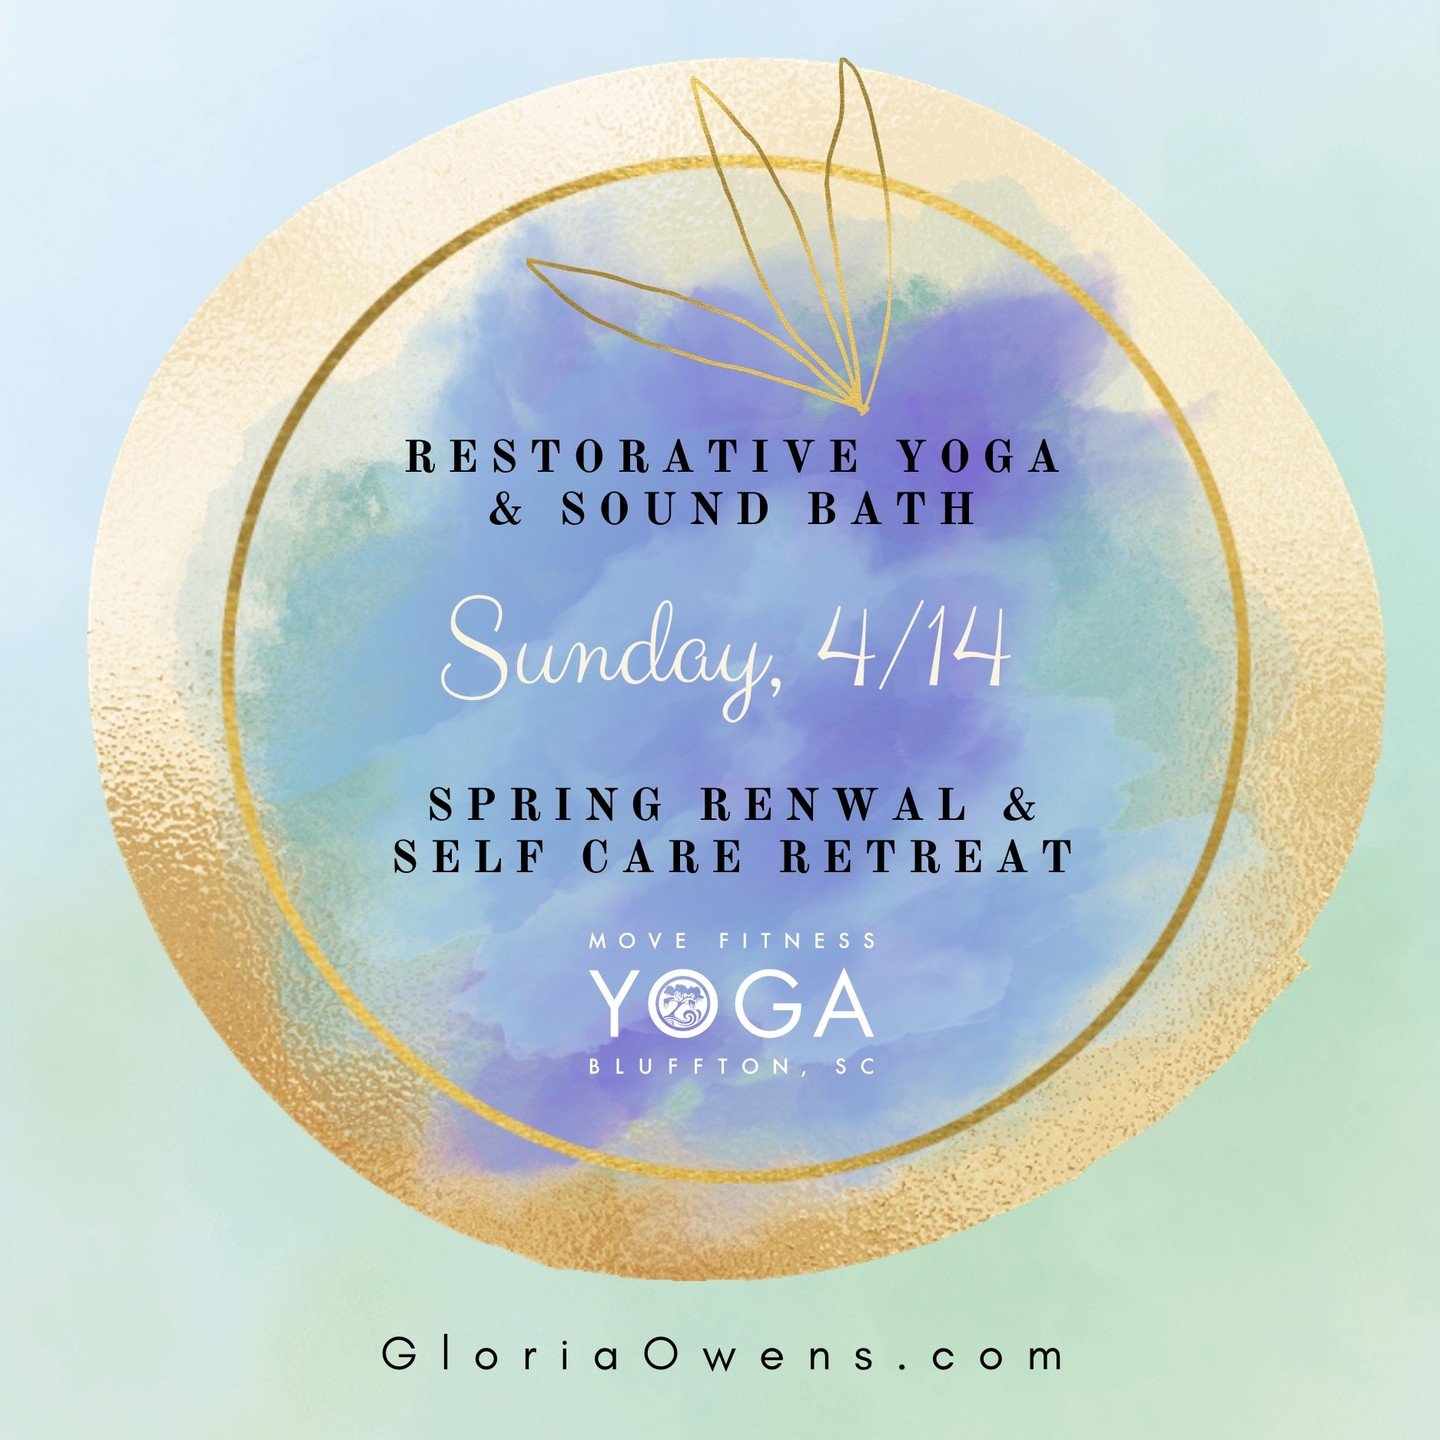 Last call for a two hour Spring renewal mini retreat - Restorative Yoga &amp; Sound Bath - on Sunday 4/14 from 4-6pm @movefitnessbluffton! We'll release layers of tension in the body with passive Restorative Yoga poses, deep breathing and relaxation 